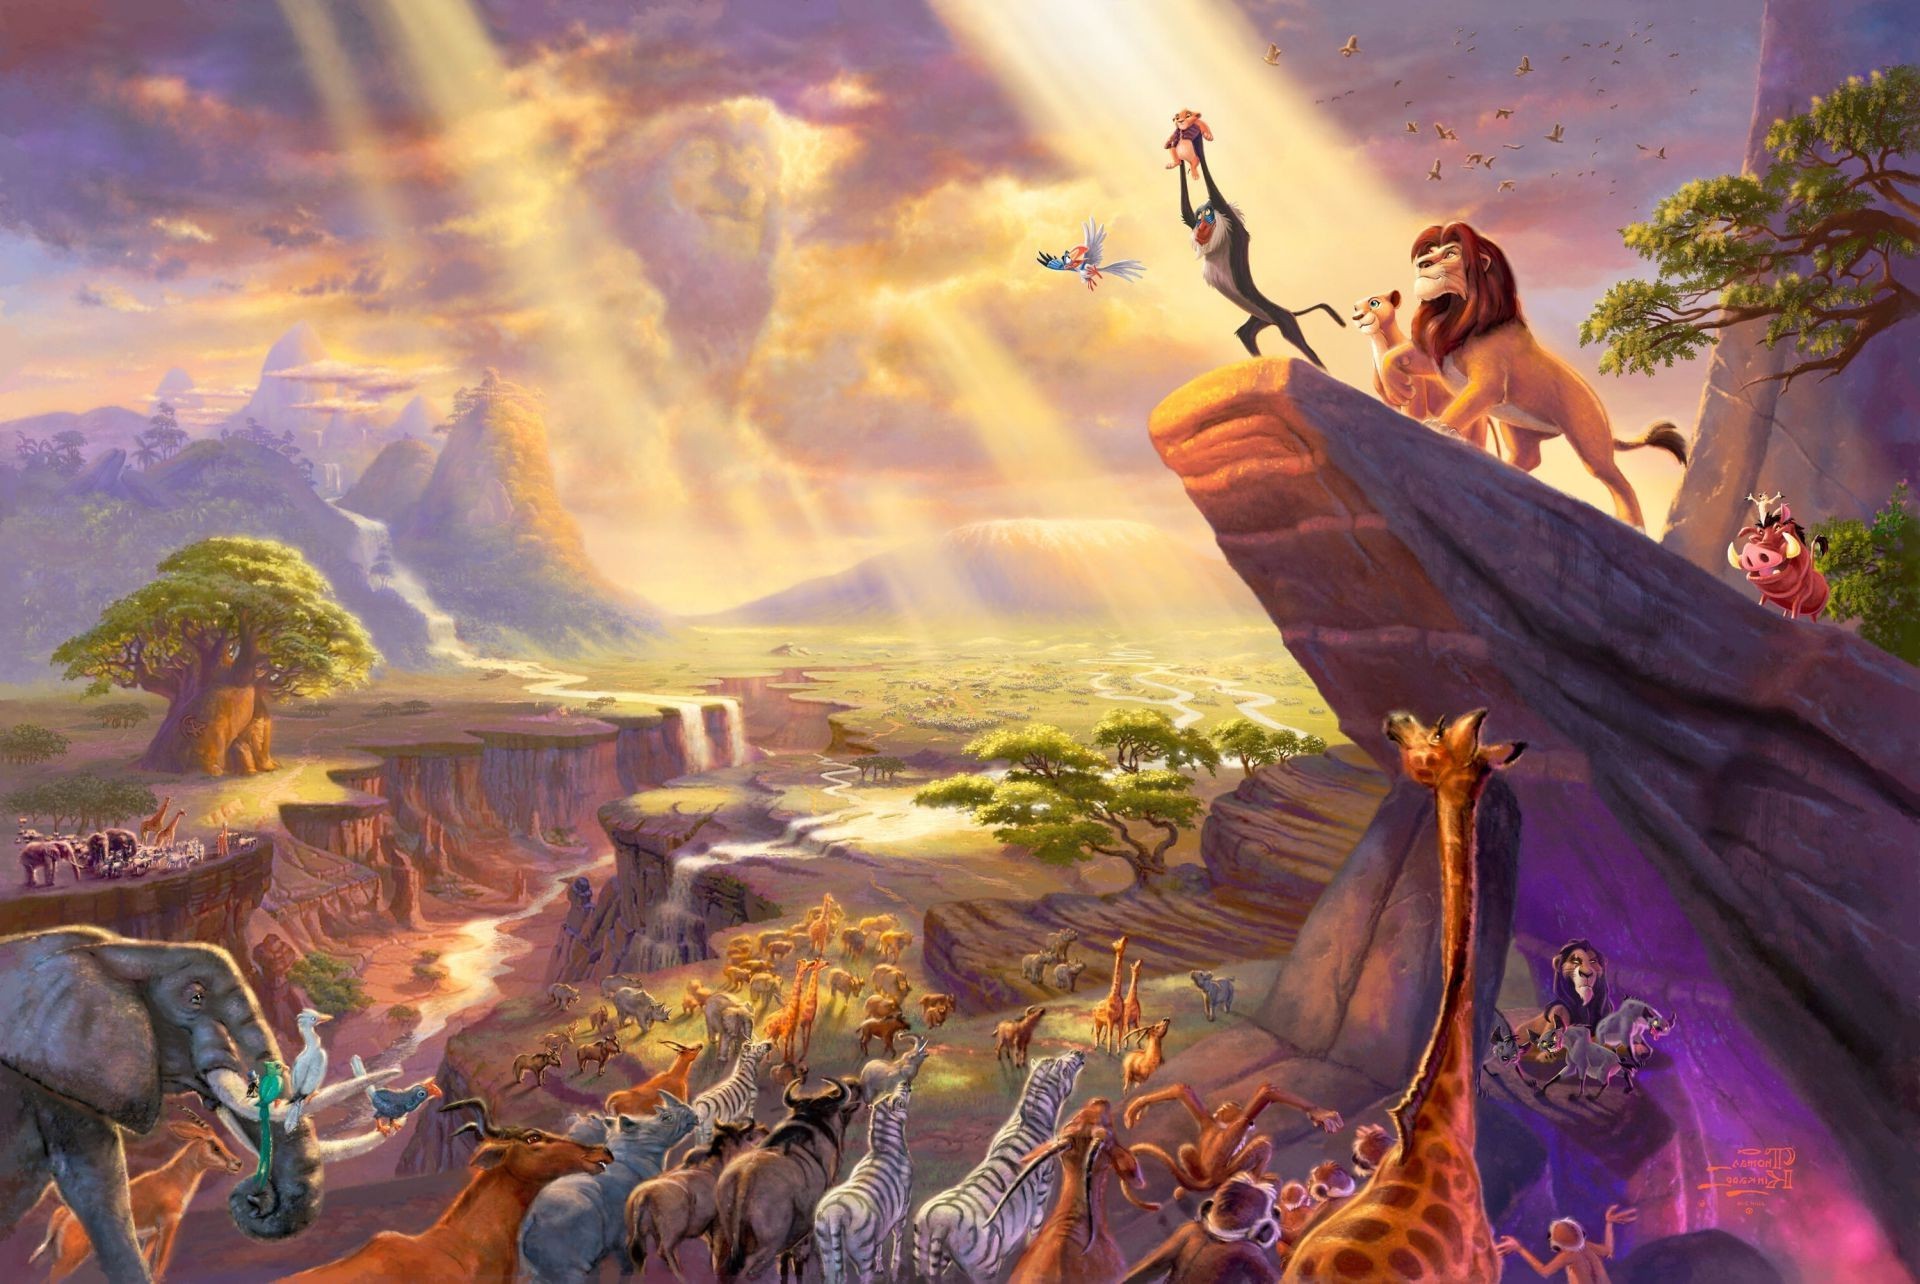 1920x1284 The lion king thomas kinkade The lion king painting paintin. iPhone  wallpapers for free.